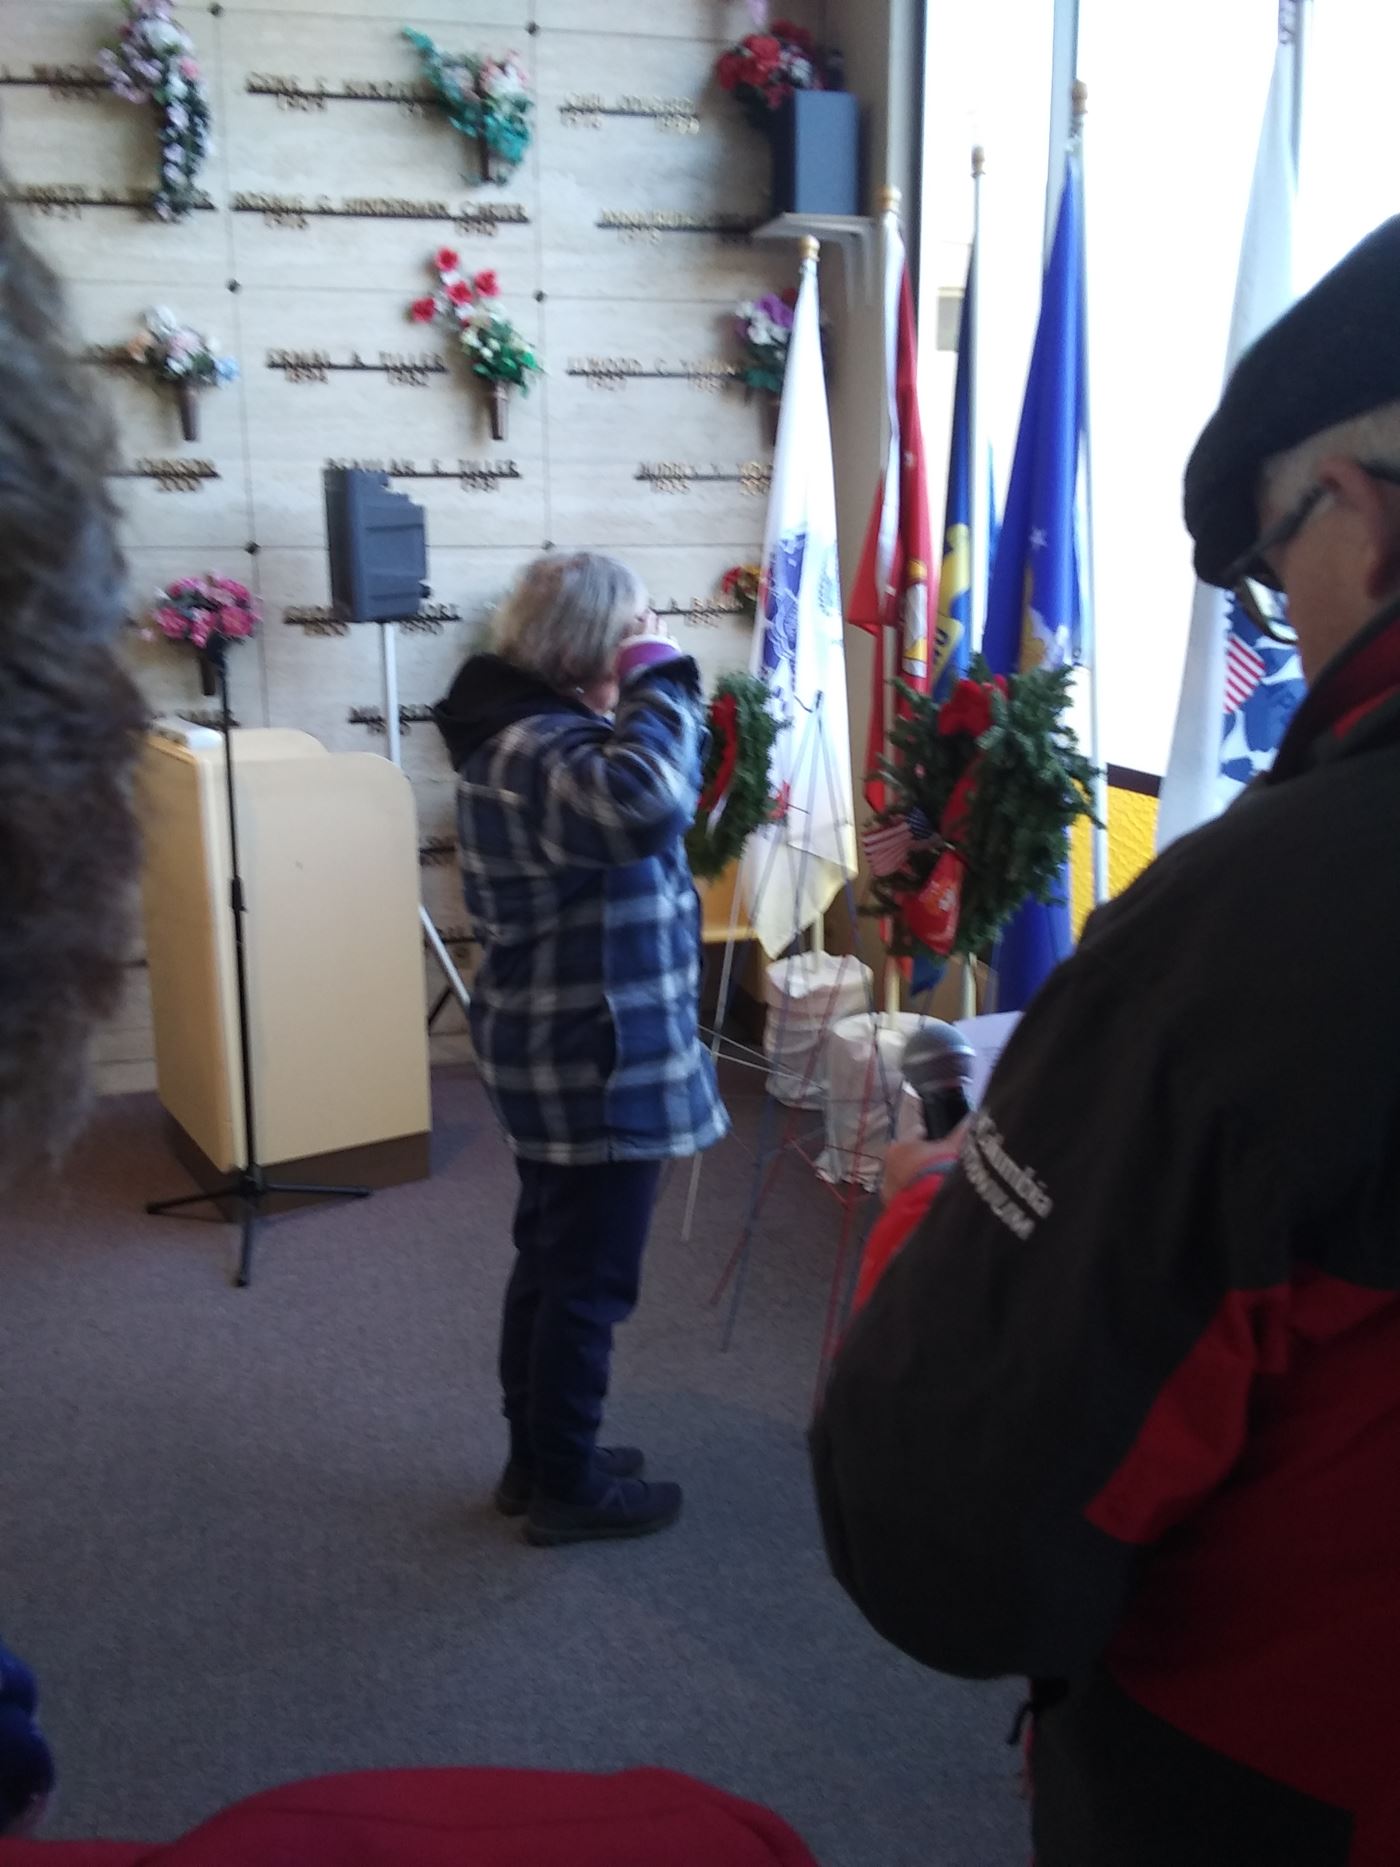 Sergeant Gloria is placing a wreath for her service in the U.S. Marines!